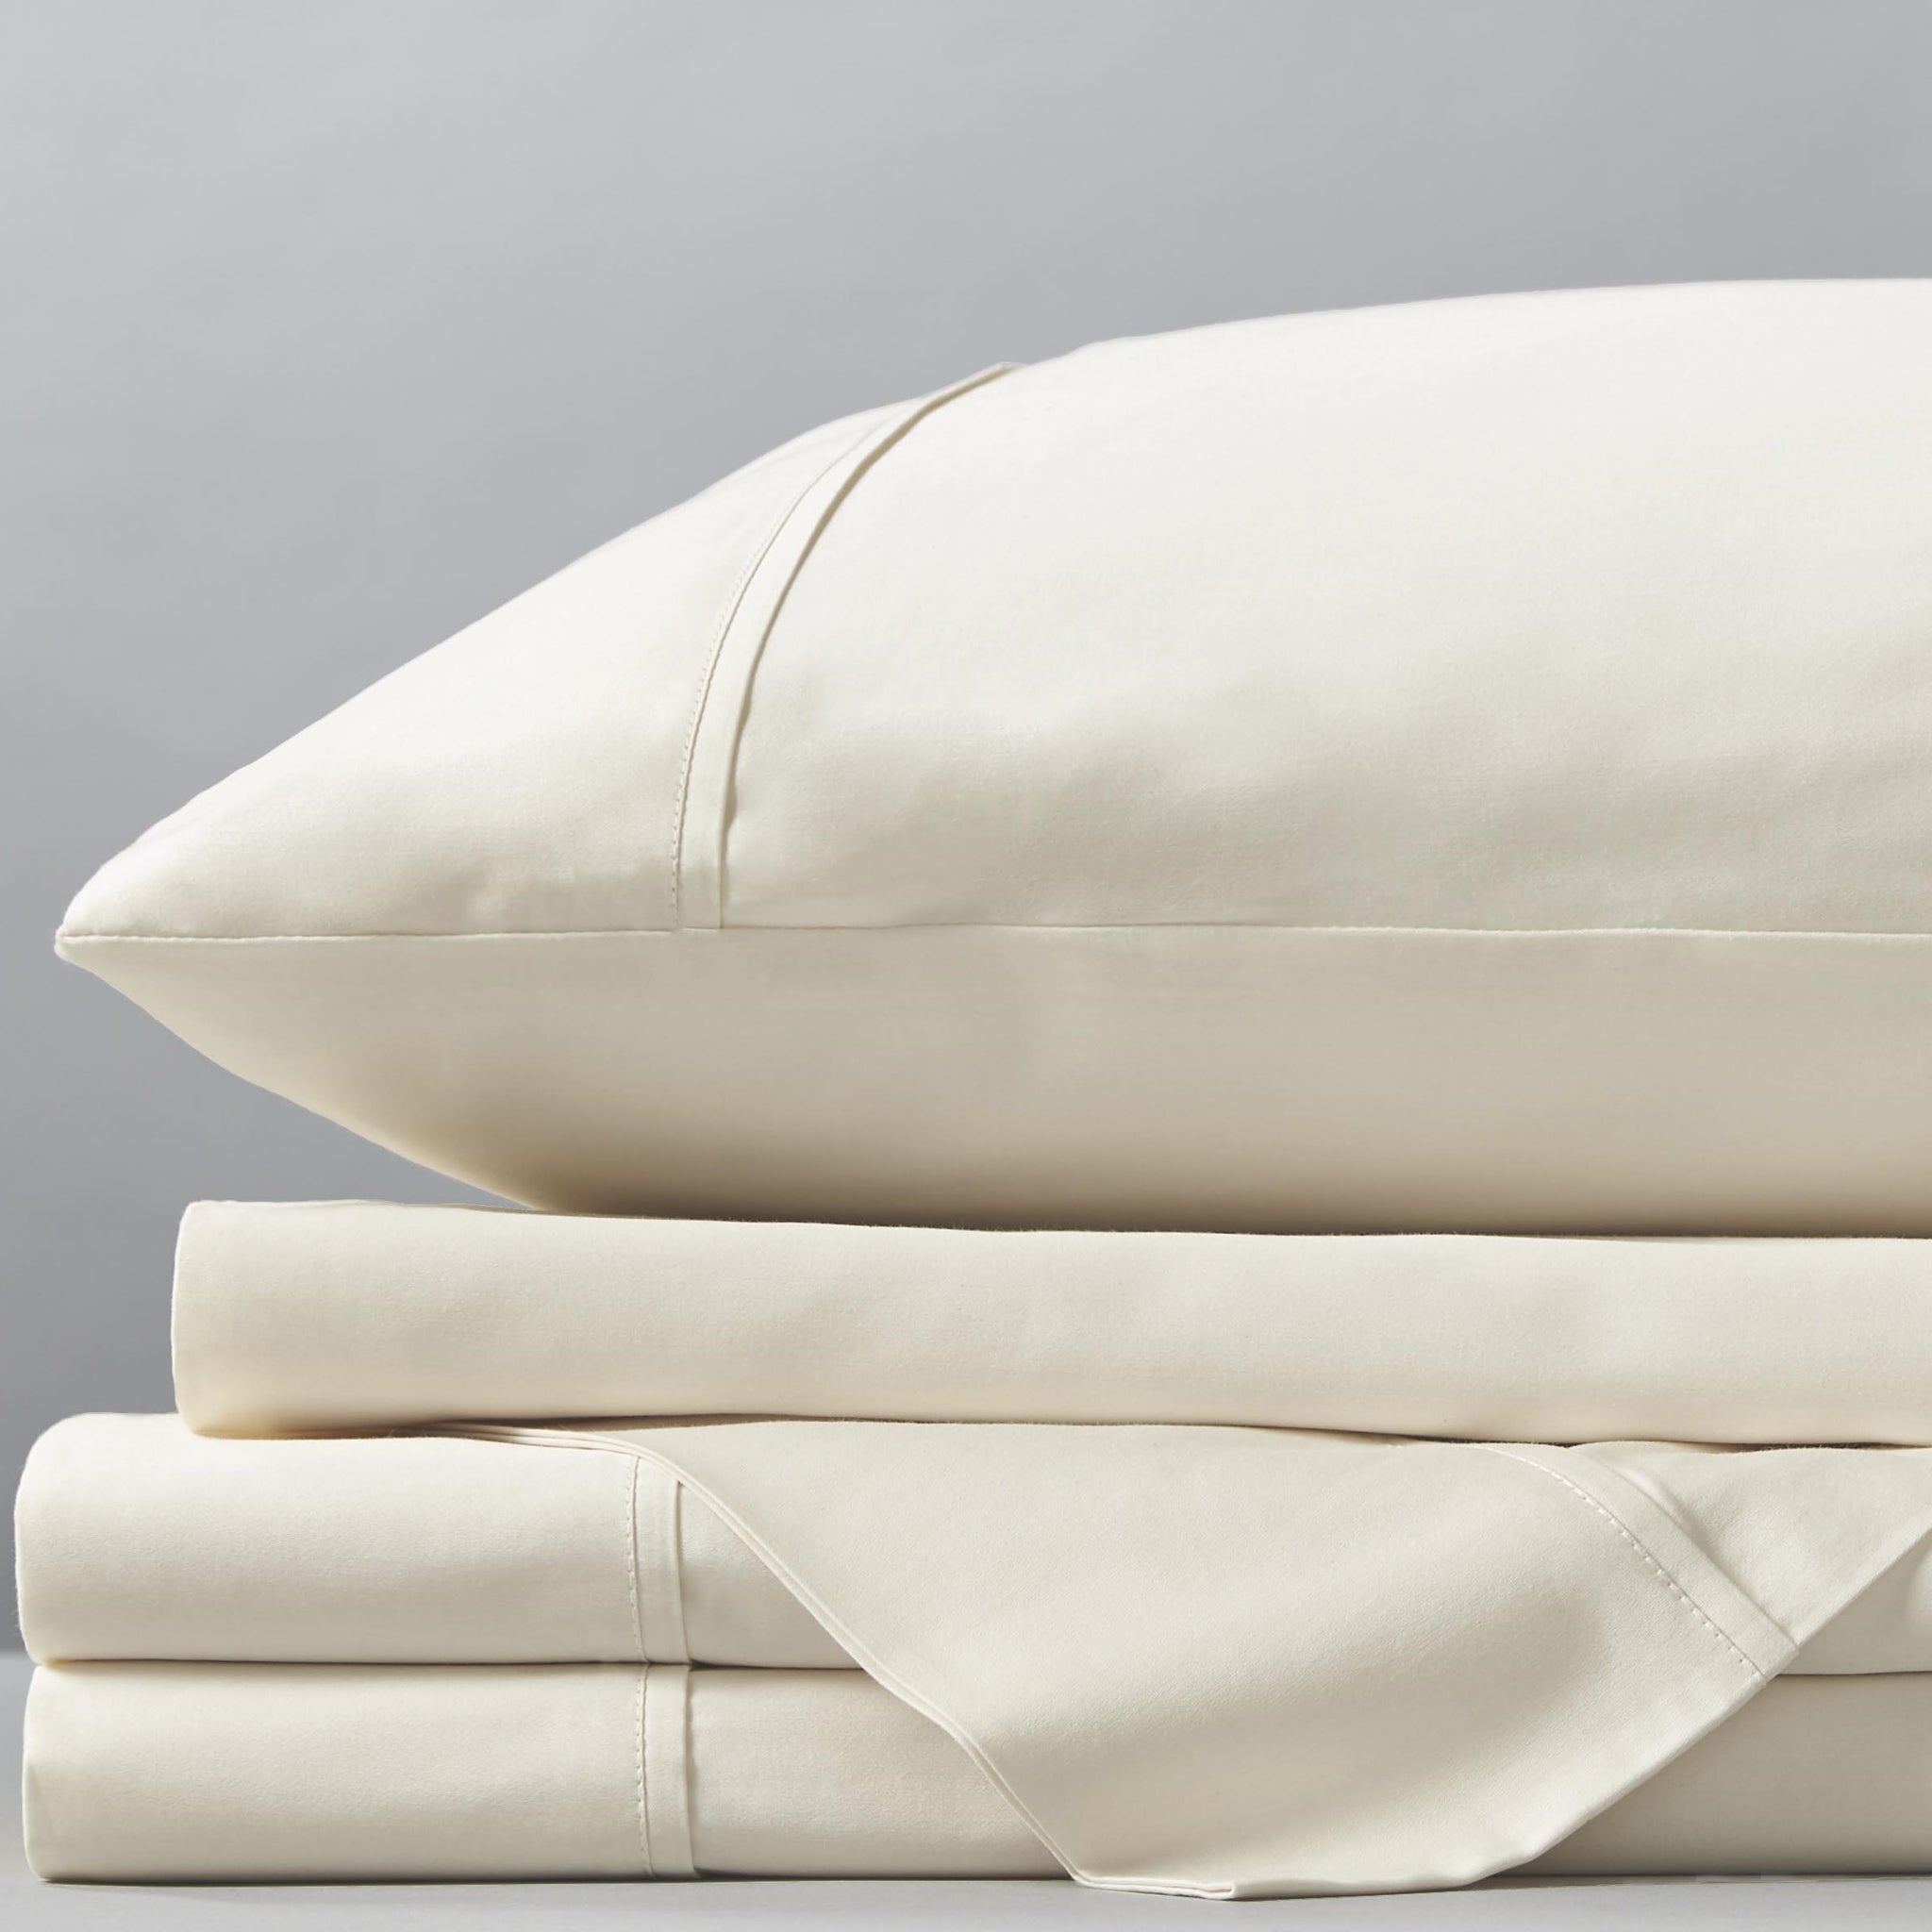 D.O.E. Organic Cotton Flat and Fitted Sheets